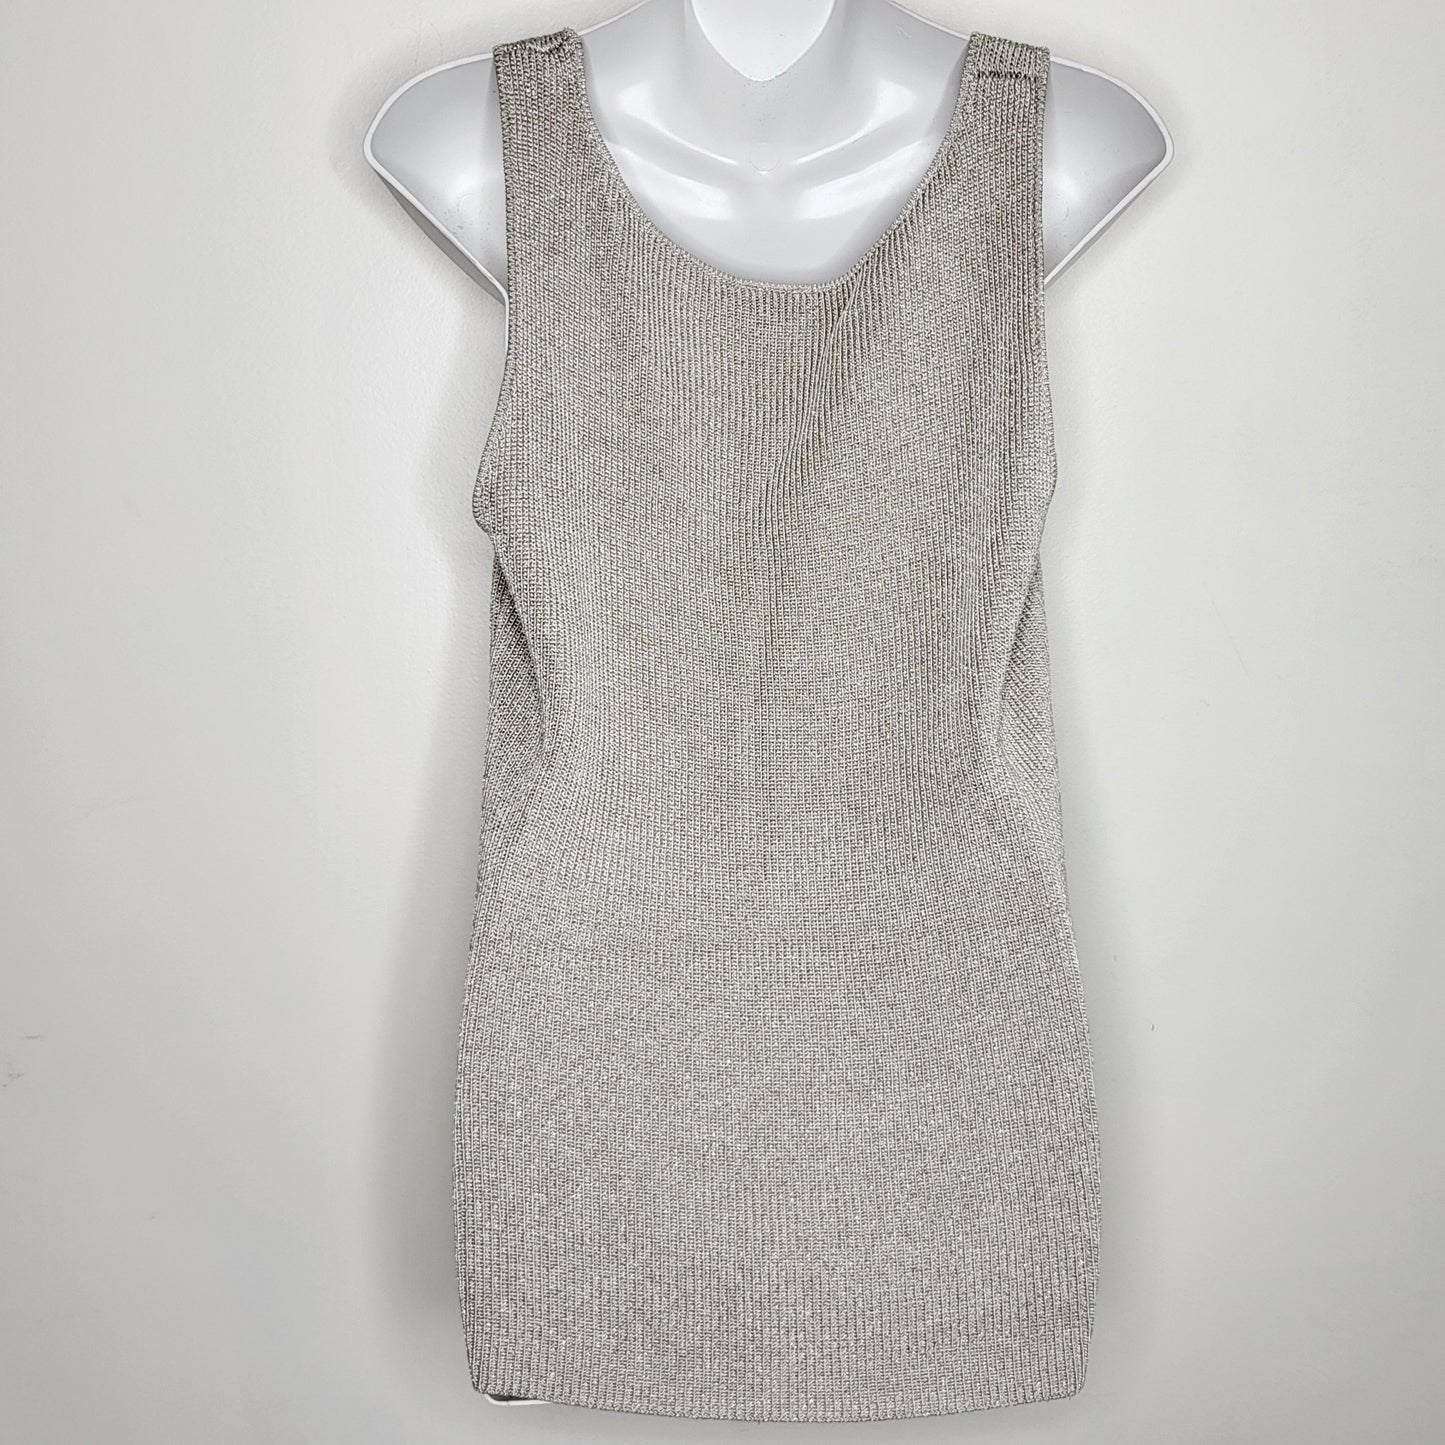 CHND2 - Ann Taylor sweater tank with sparkles, size XL (measures like a medium), good condition